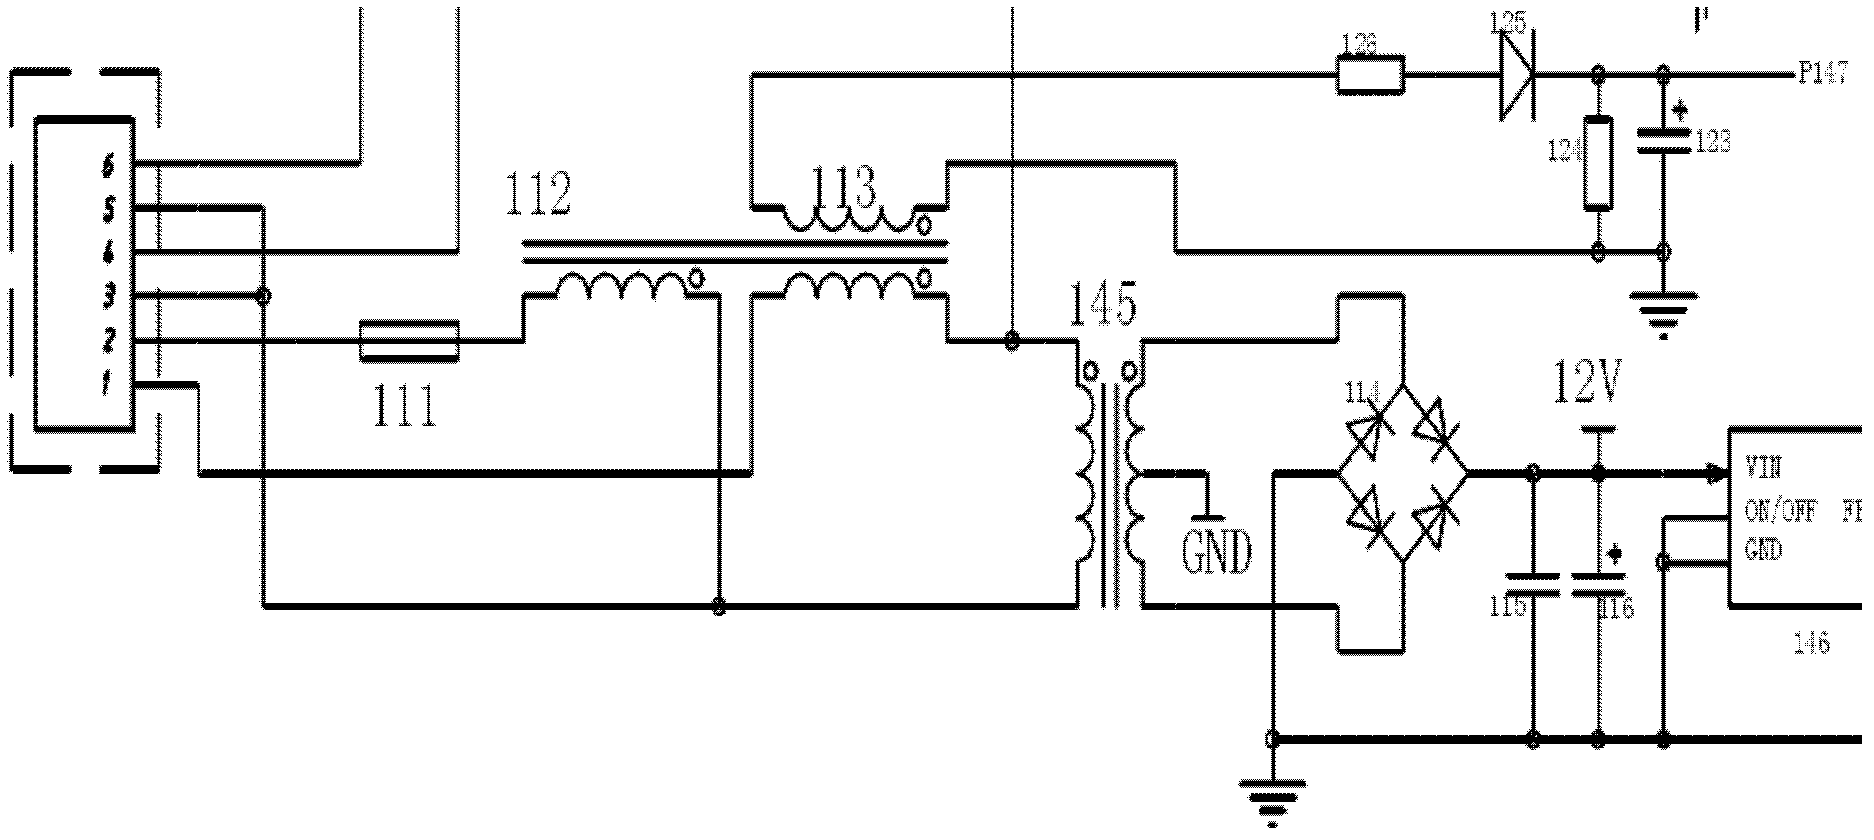 Control system for commercial gas cooker